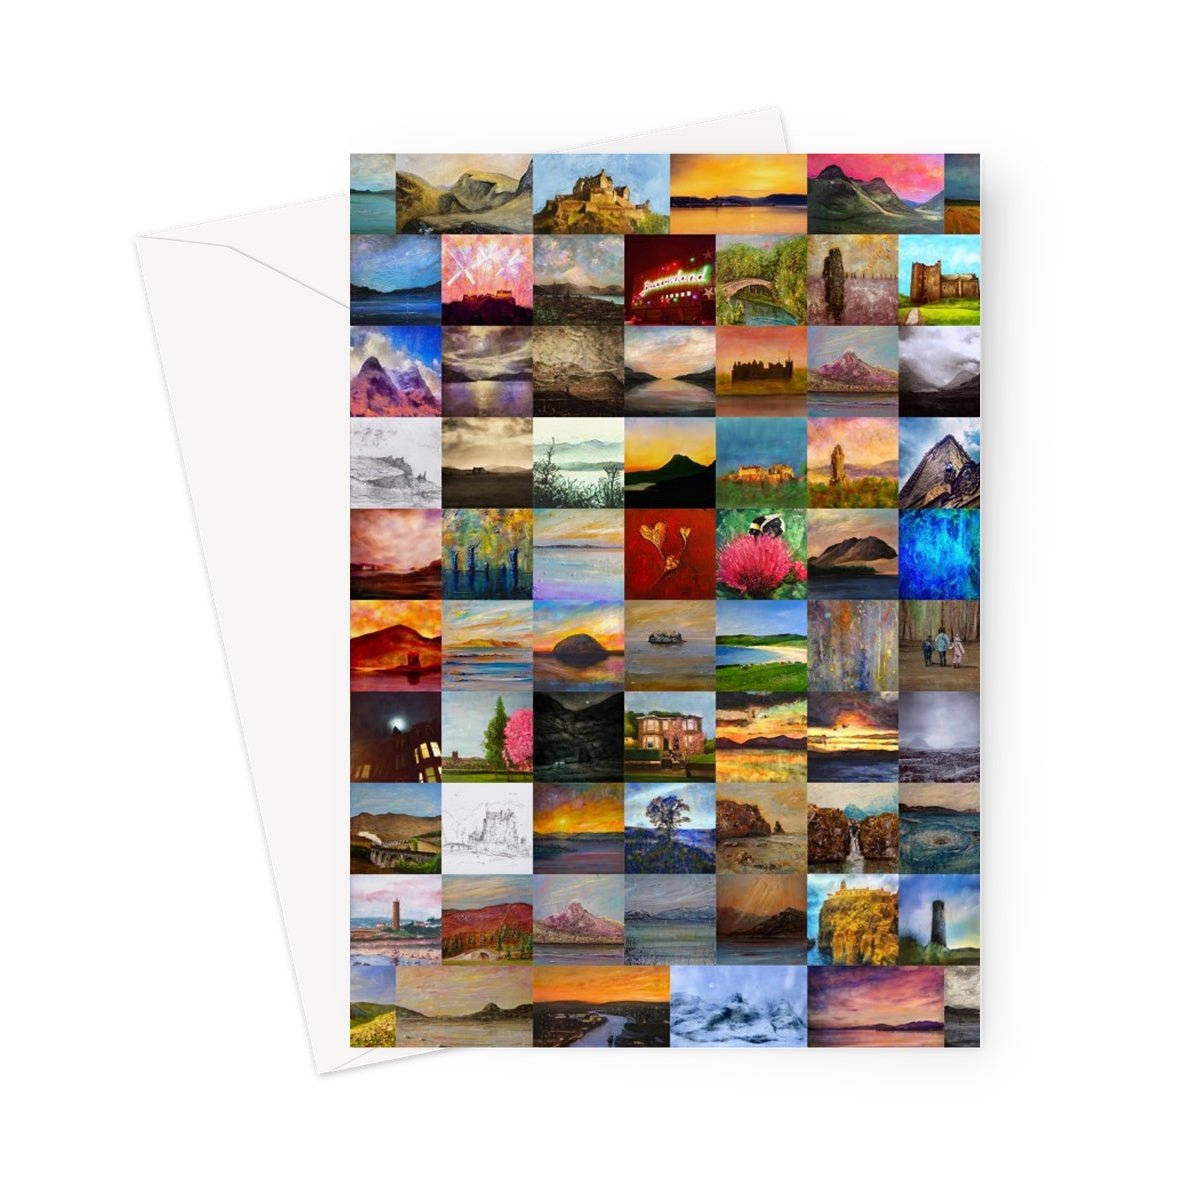 Scottish Artist Hunter Art Collage Greeting Card-Greetings Cards-Scottish Artist Hunter-5"x7"-10 Cards-Paintings, Prints, Homeware, Art Gifts From Scotland By Scottish Artist Kevin Hunter